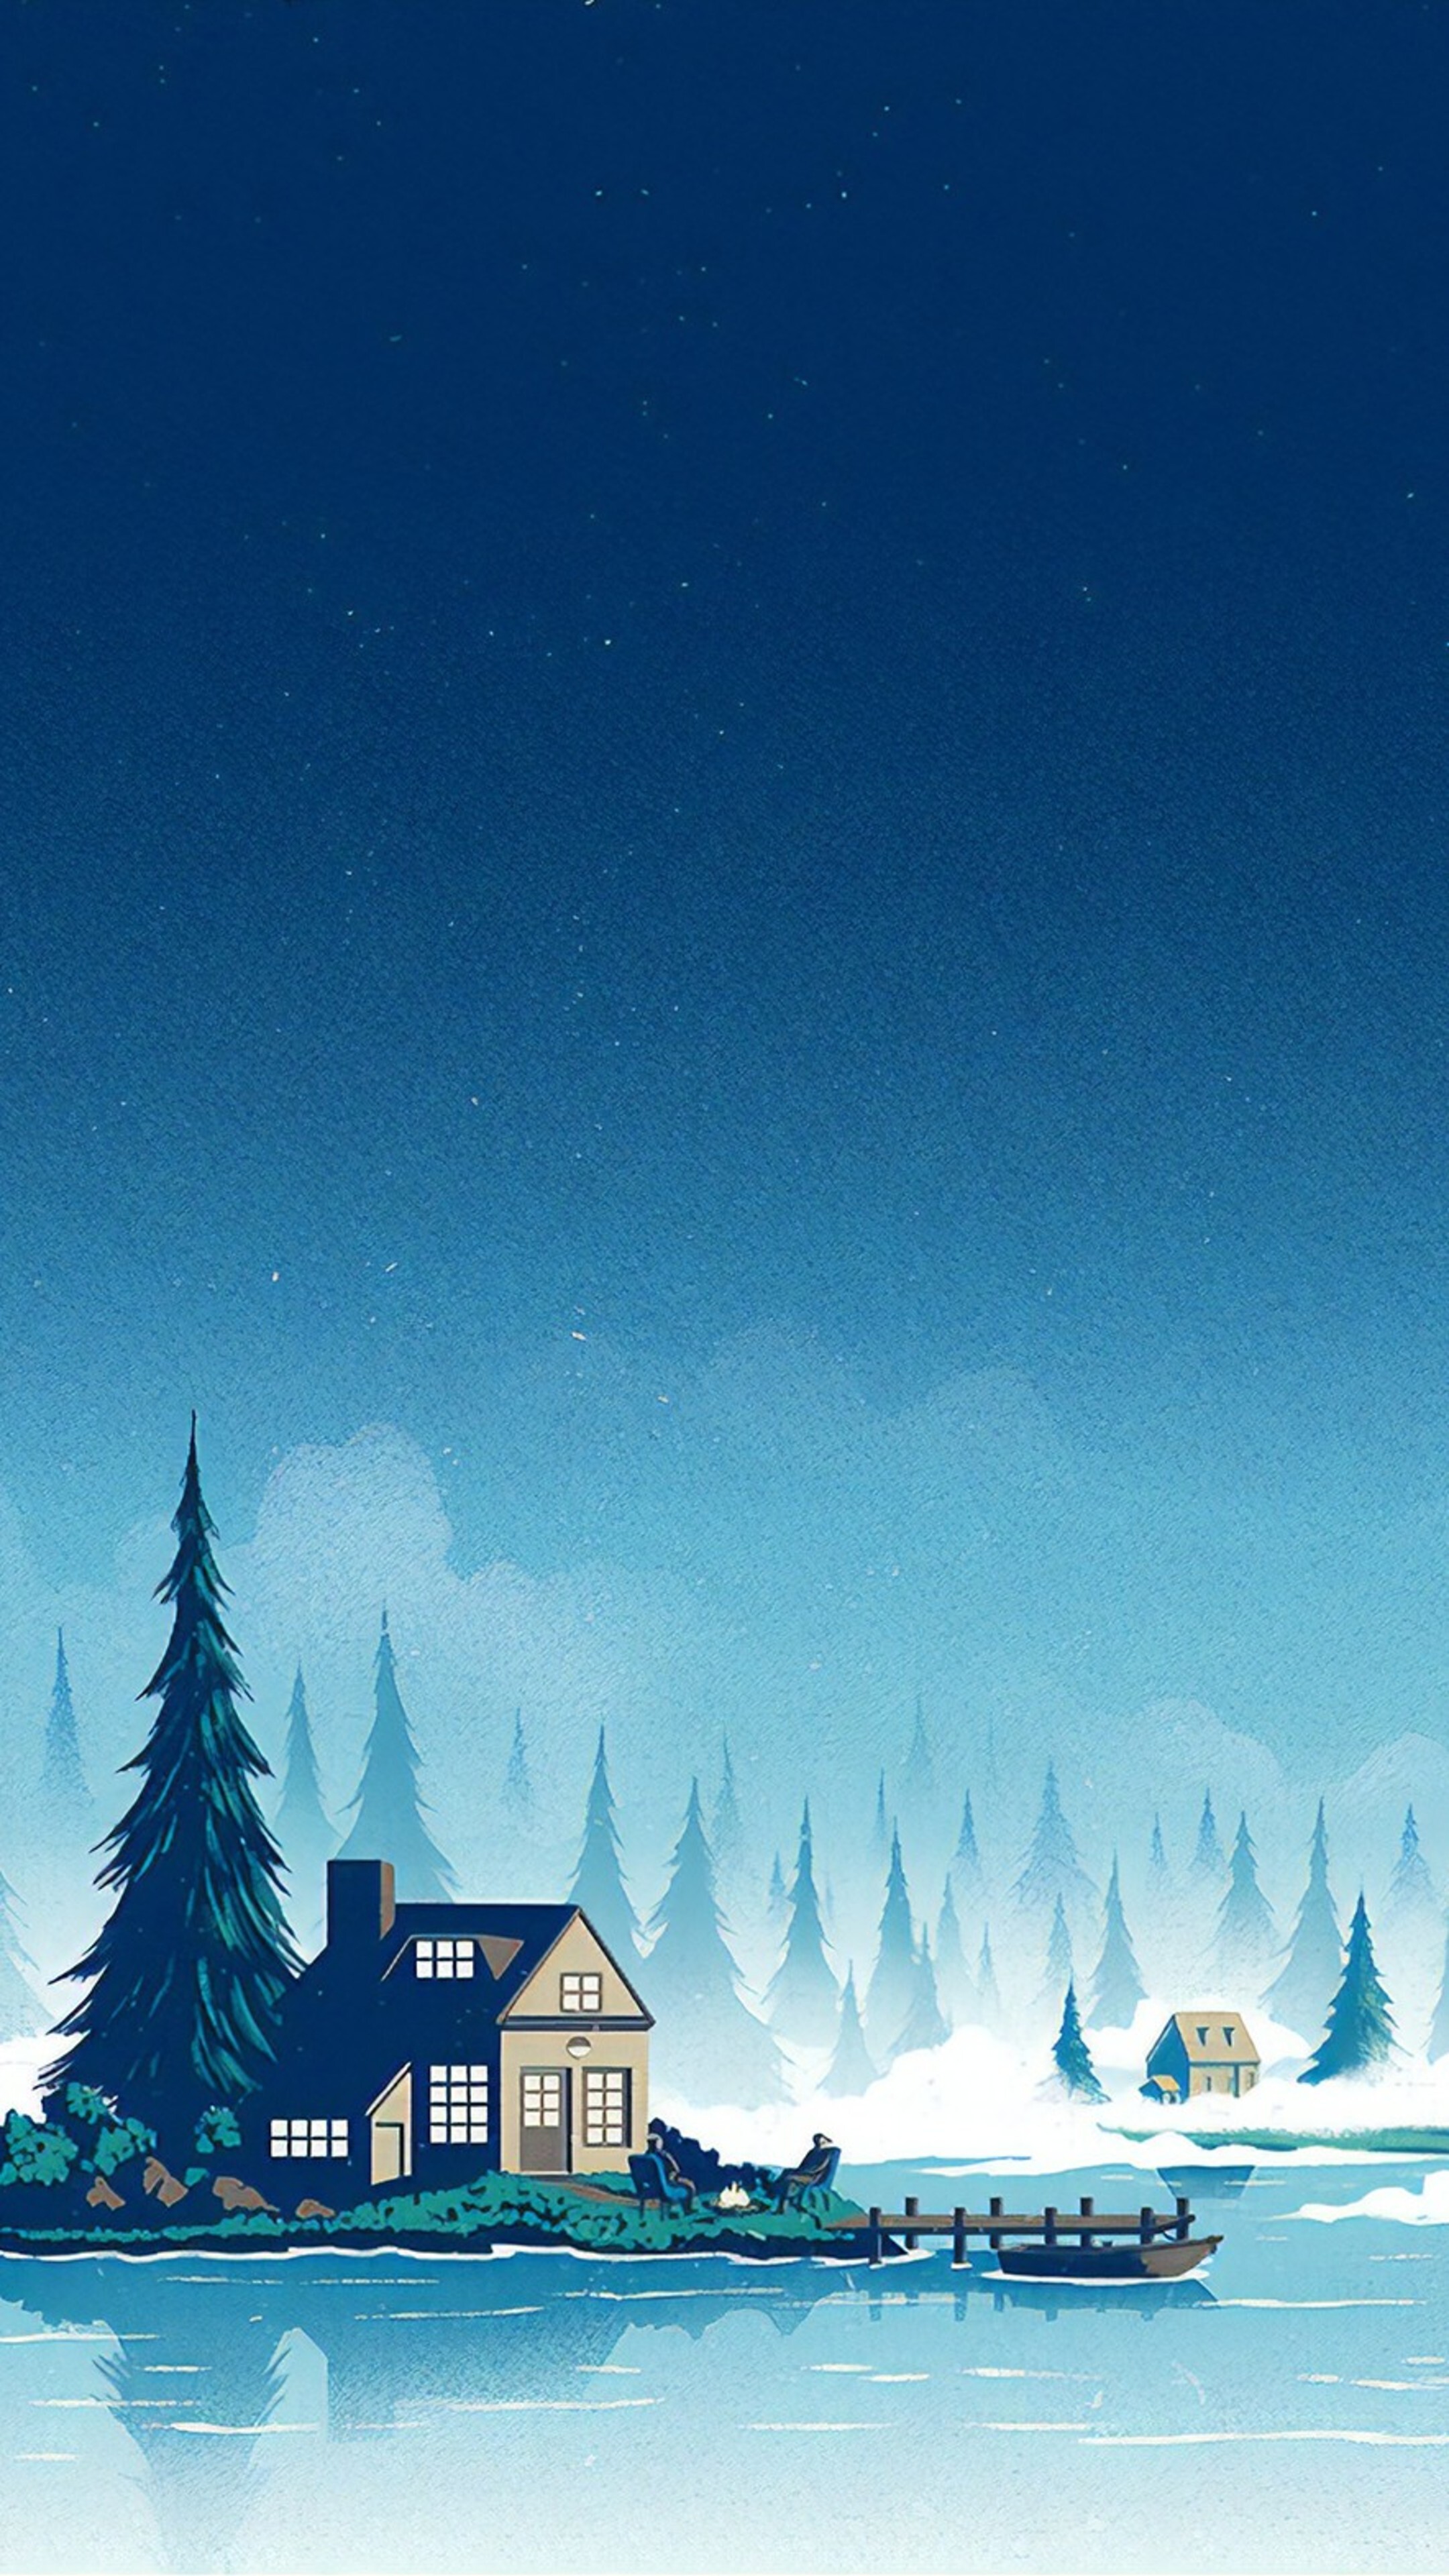 Snowy wallpaper illustrations for iPhone